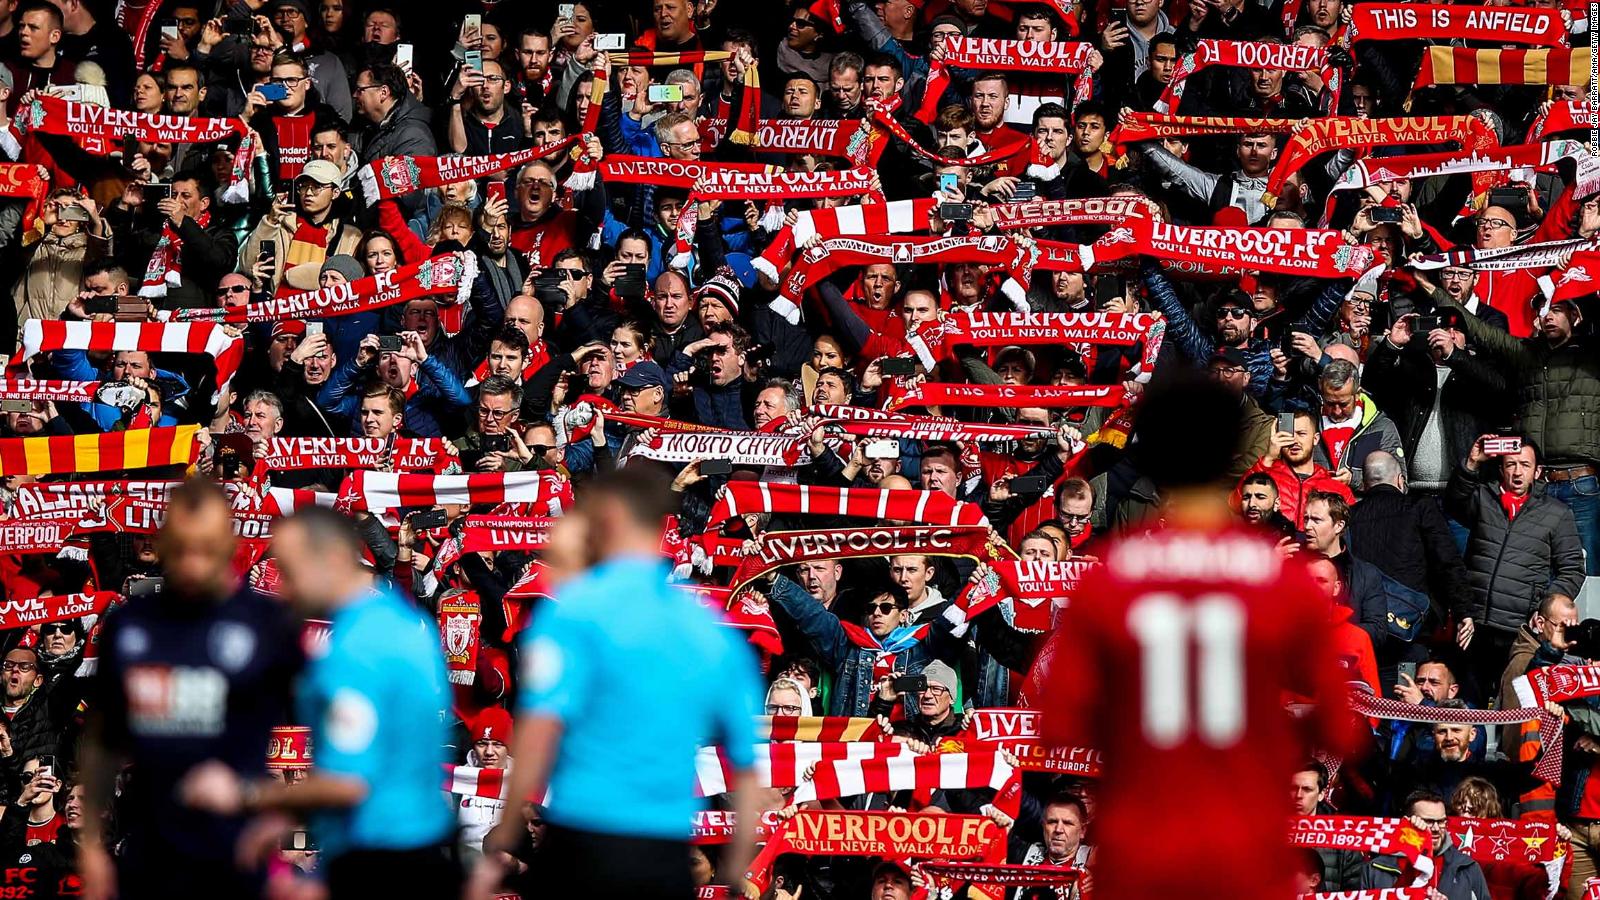 Liverpool: The agonizing wait for a first Premier League title